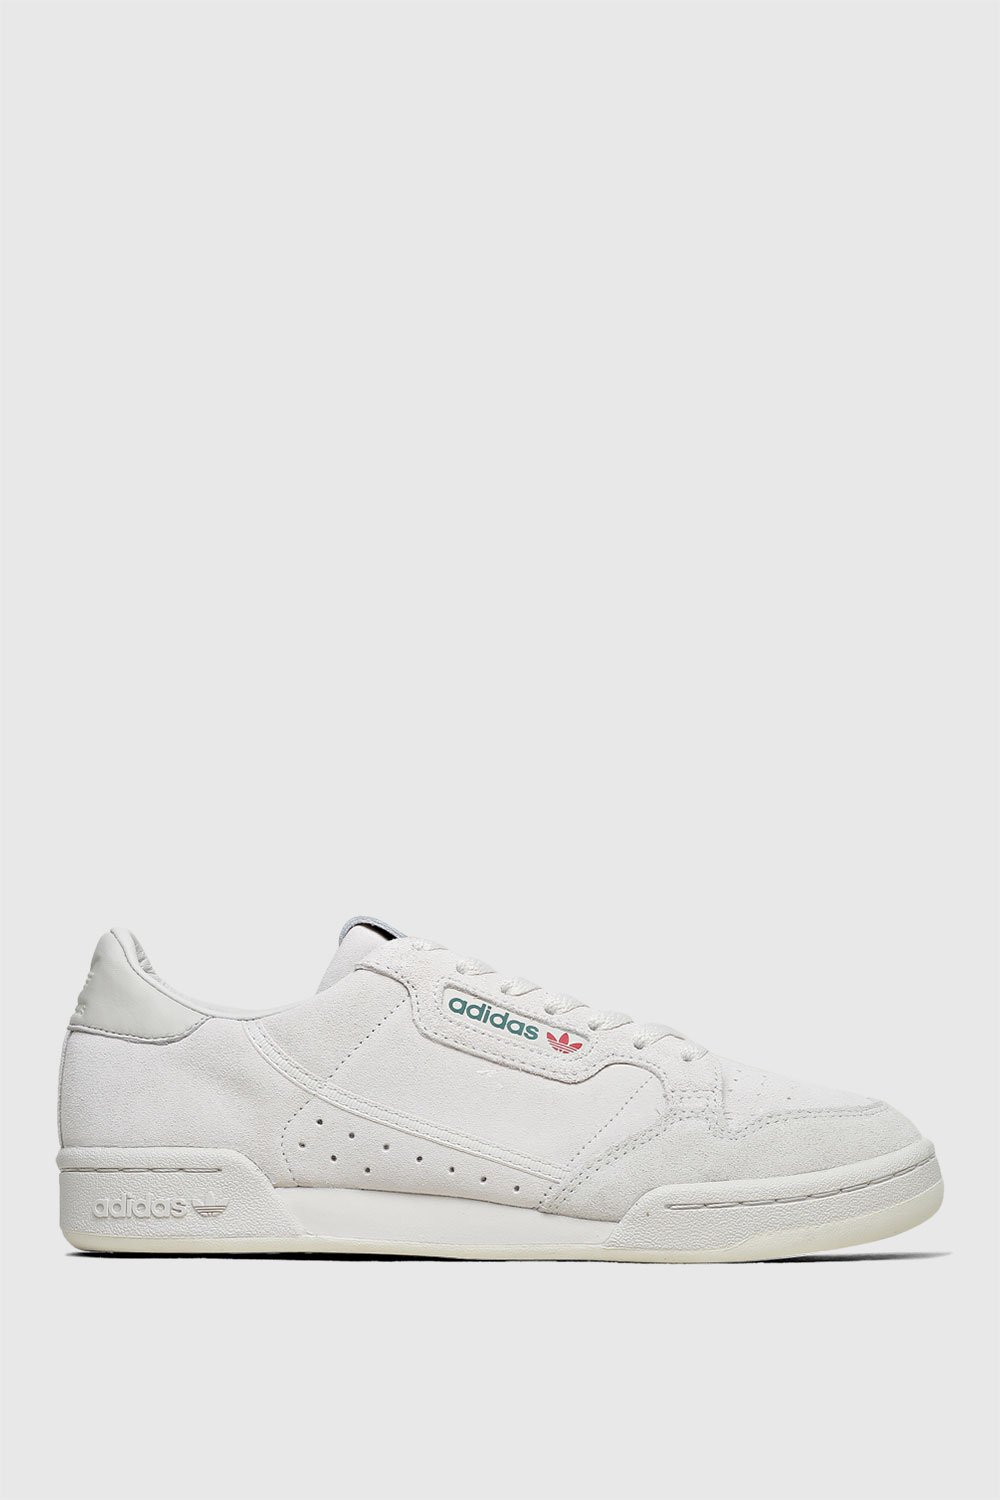 adidas continental 80 suede raw white & off white